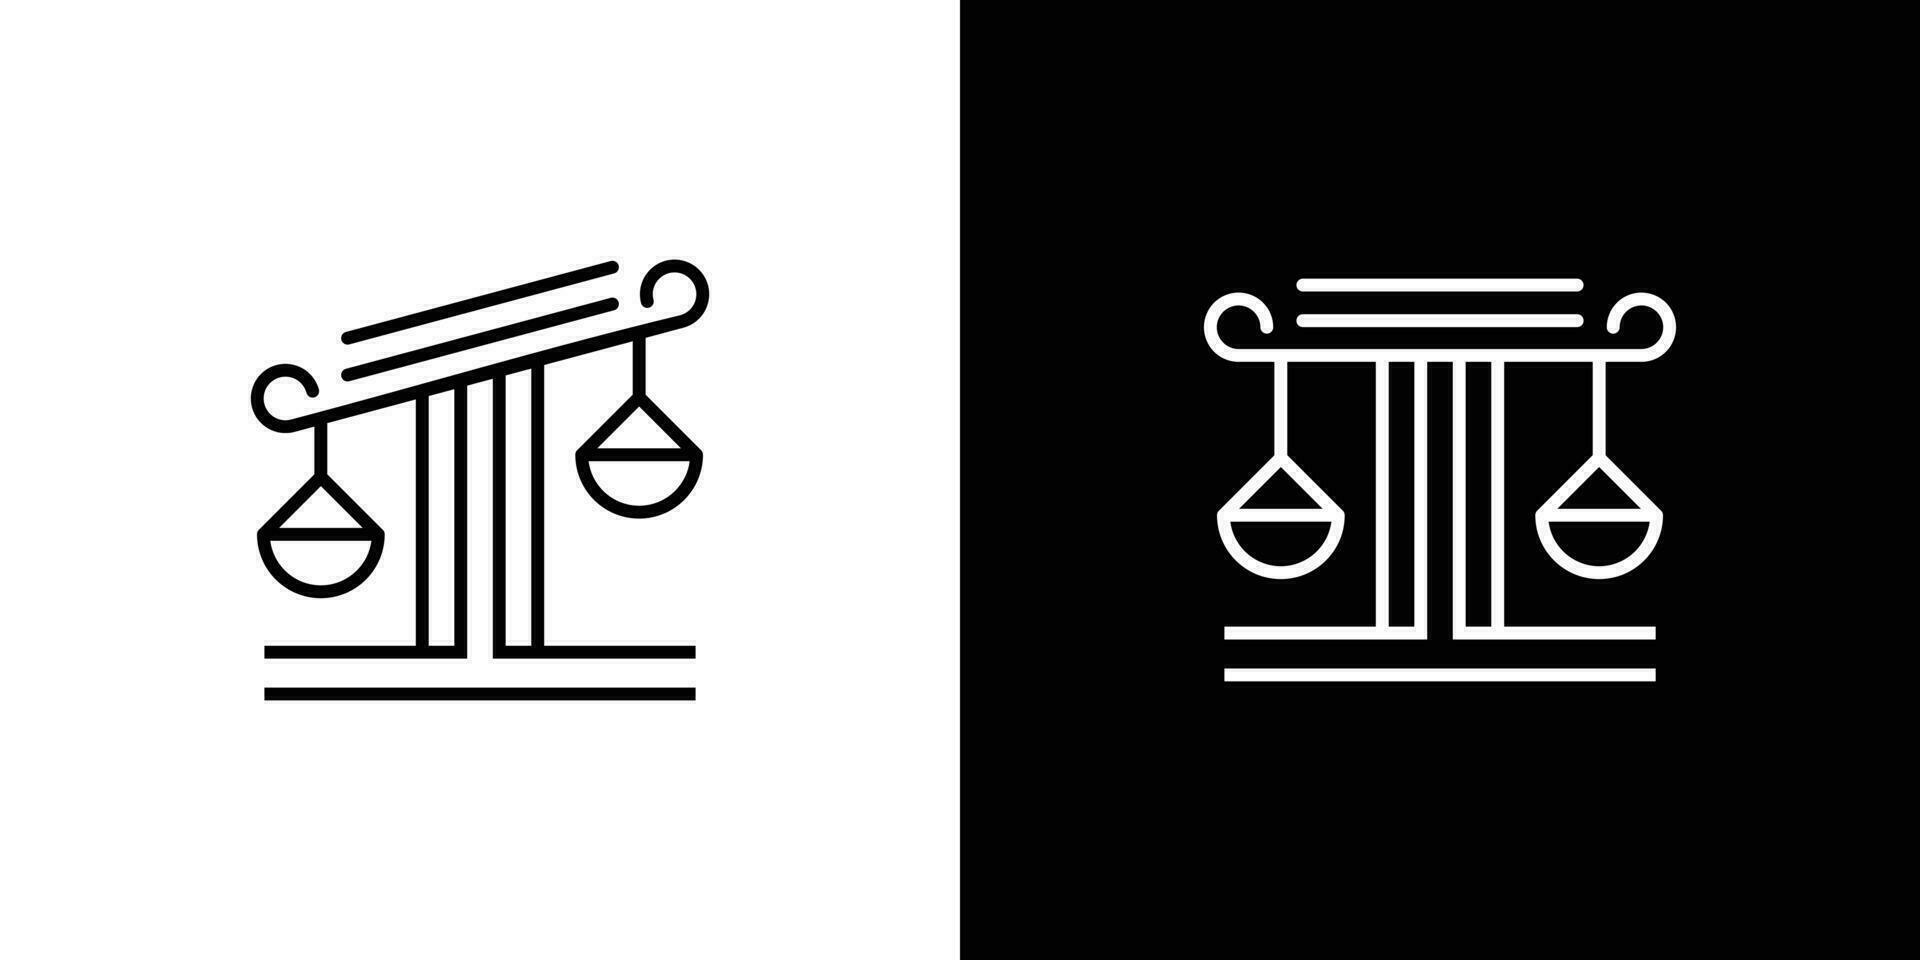 logo design of scales combined with pillars and made in a minimalist line style, suitable for a legal logo vector